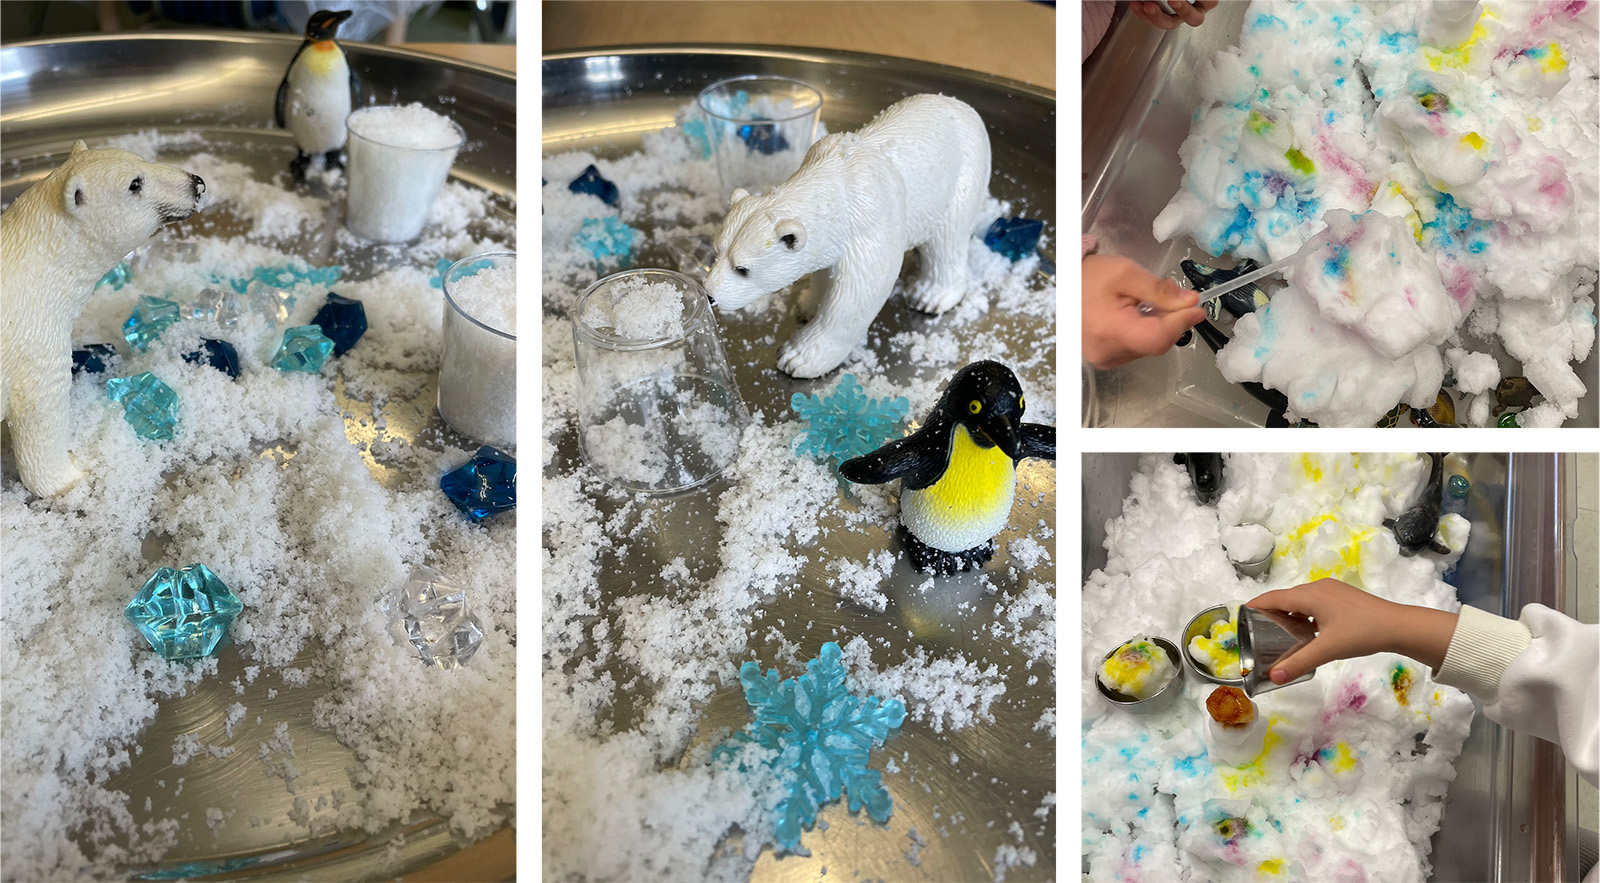 Young kids creating art scenes in the classroom with recently-fallen snow